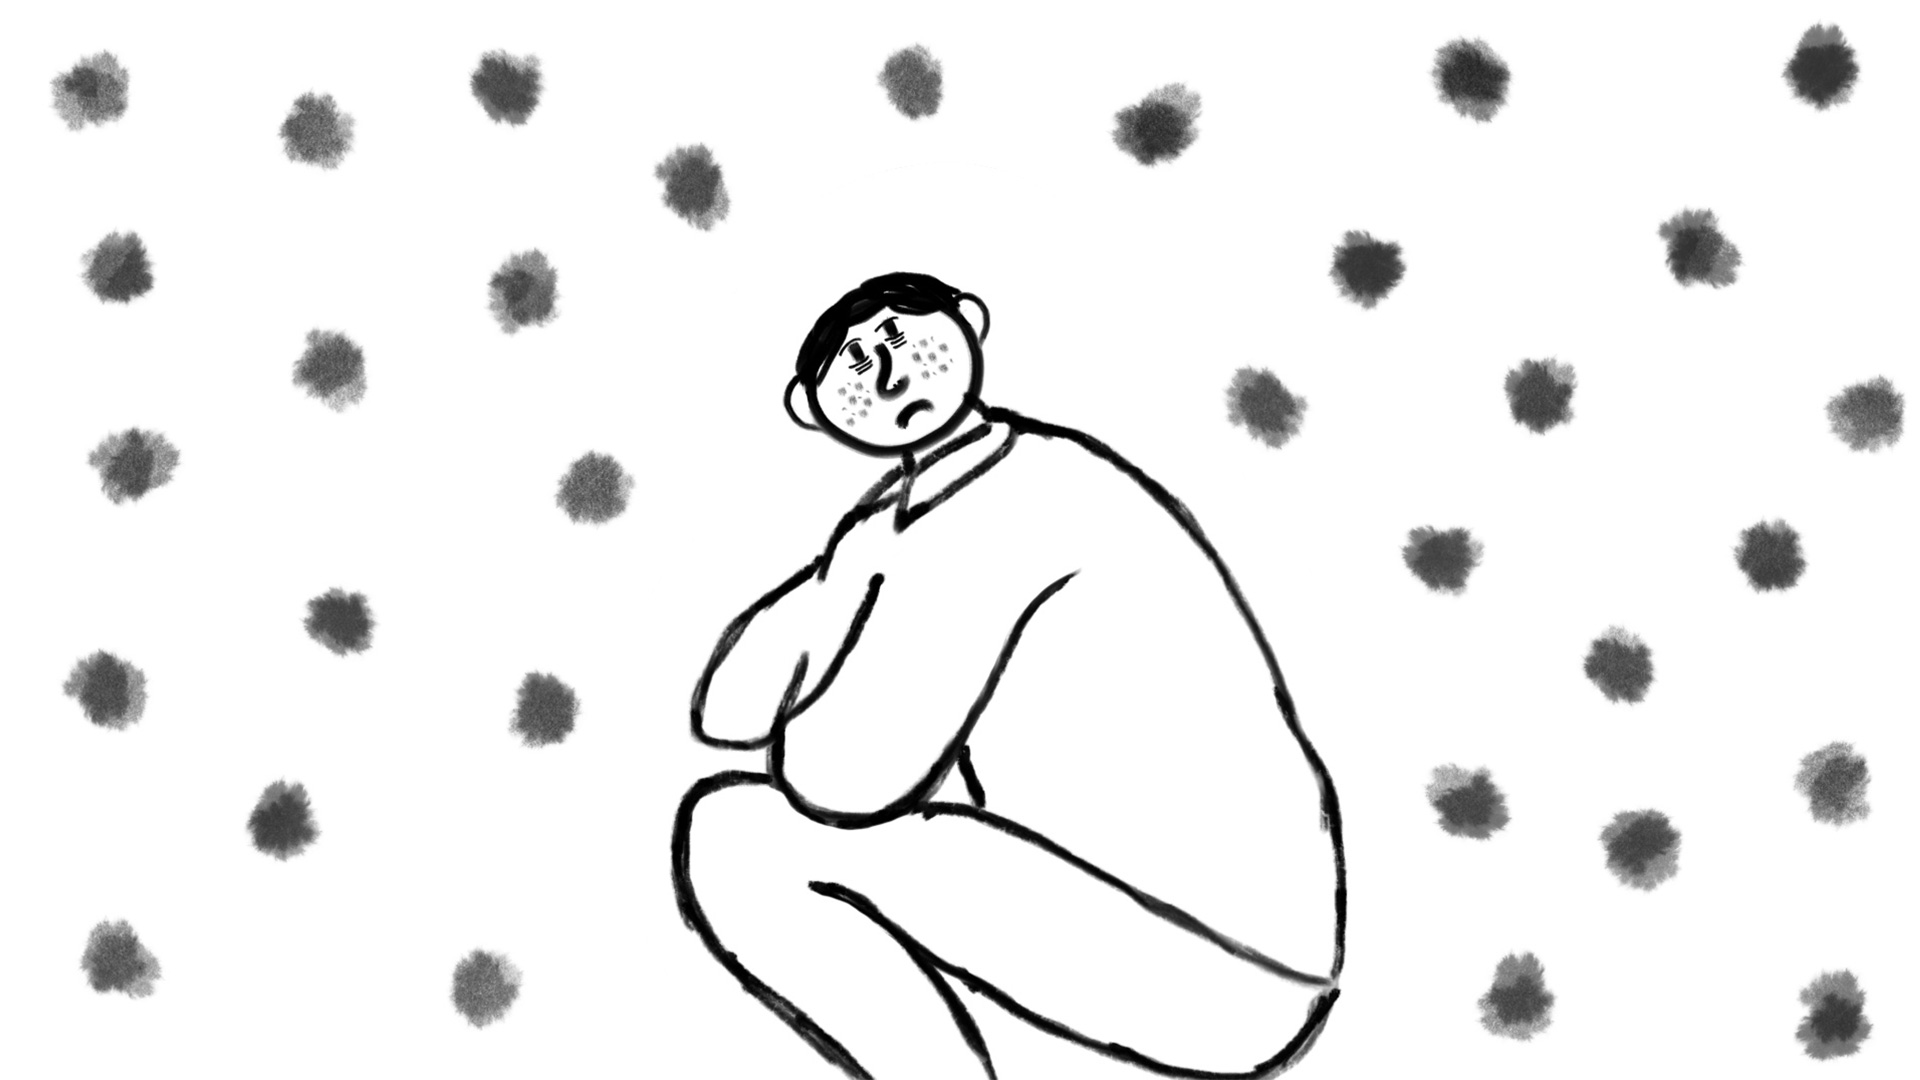 Illustration of a person squatting on the ground with a pattern surrounded by dots.